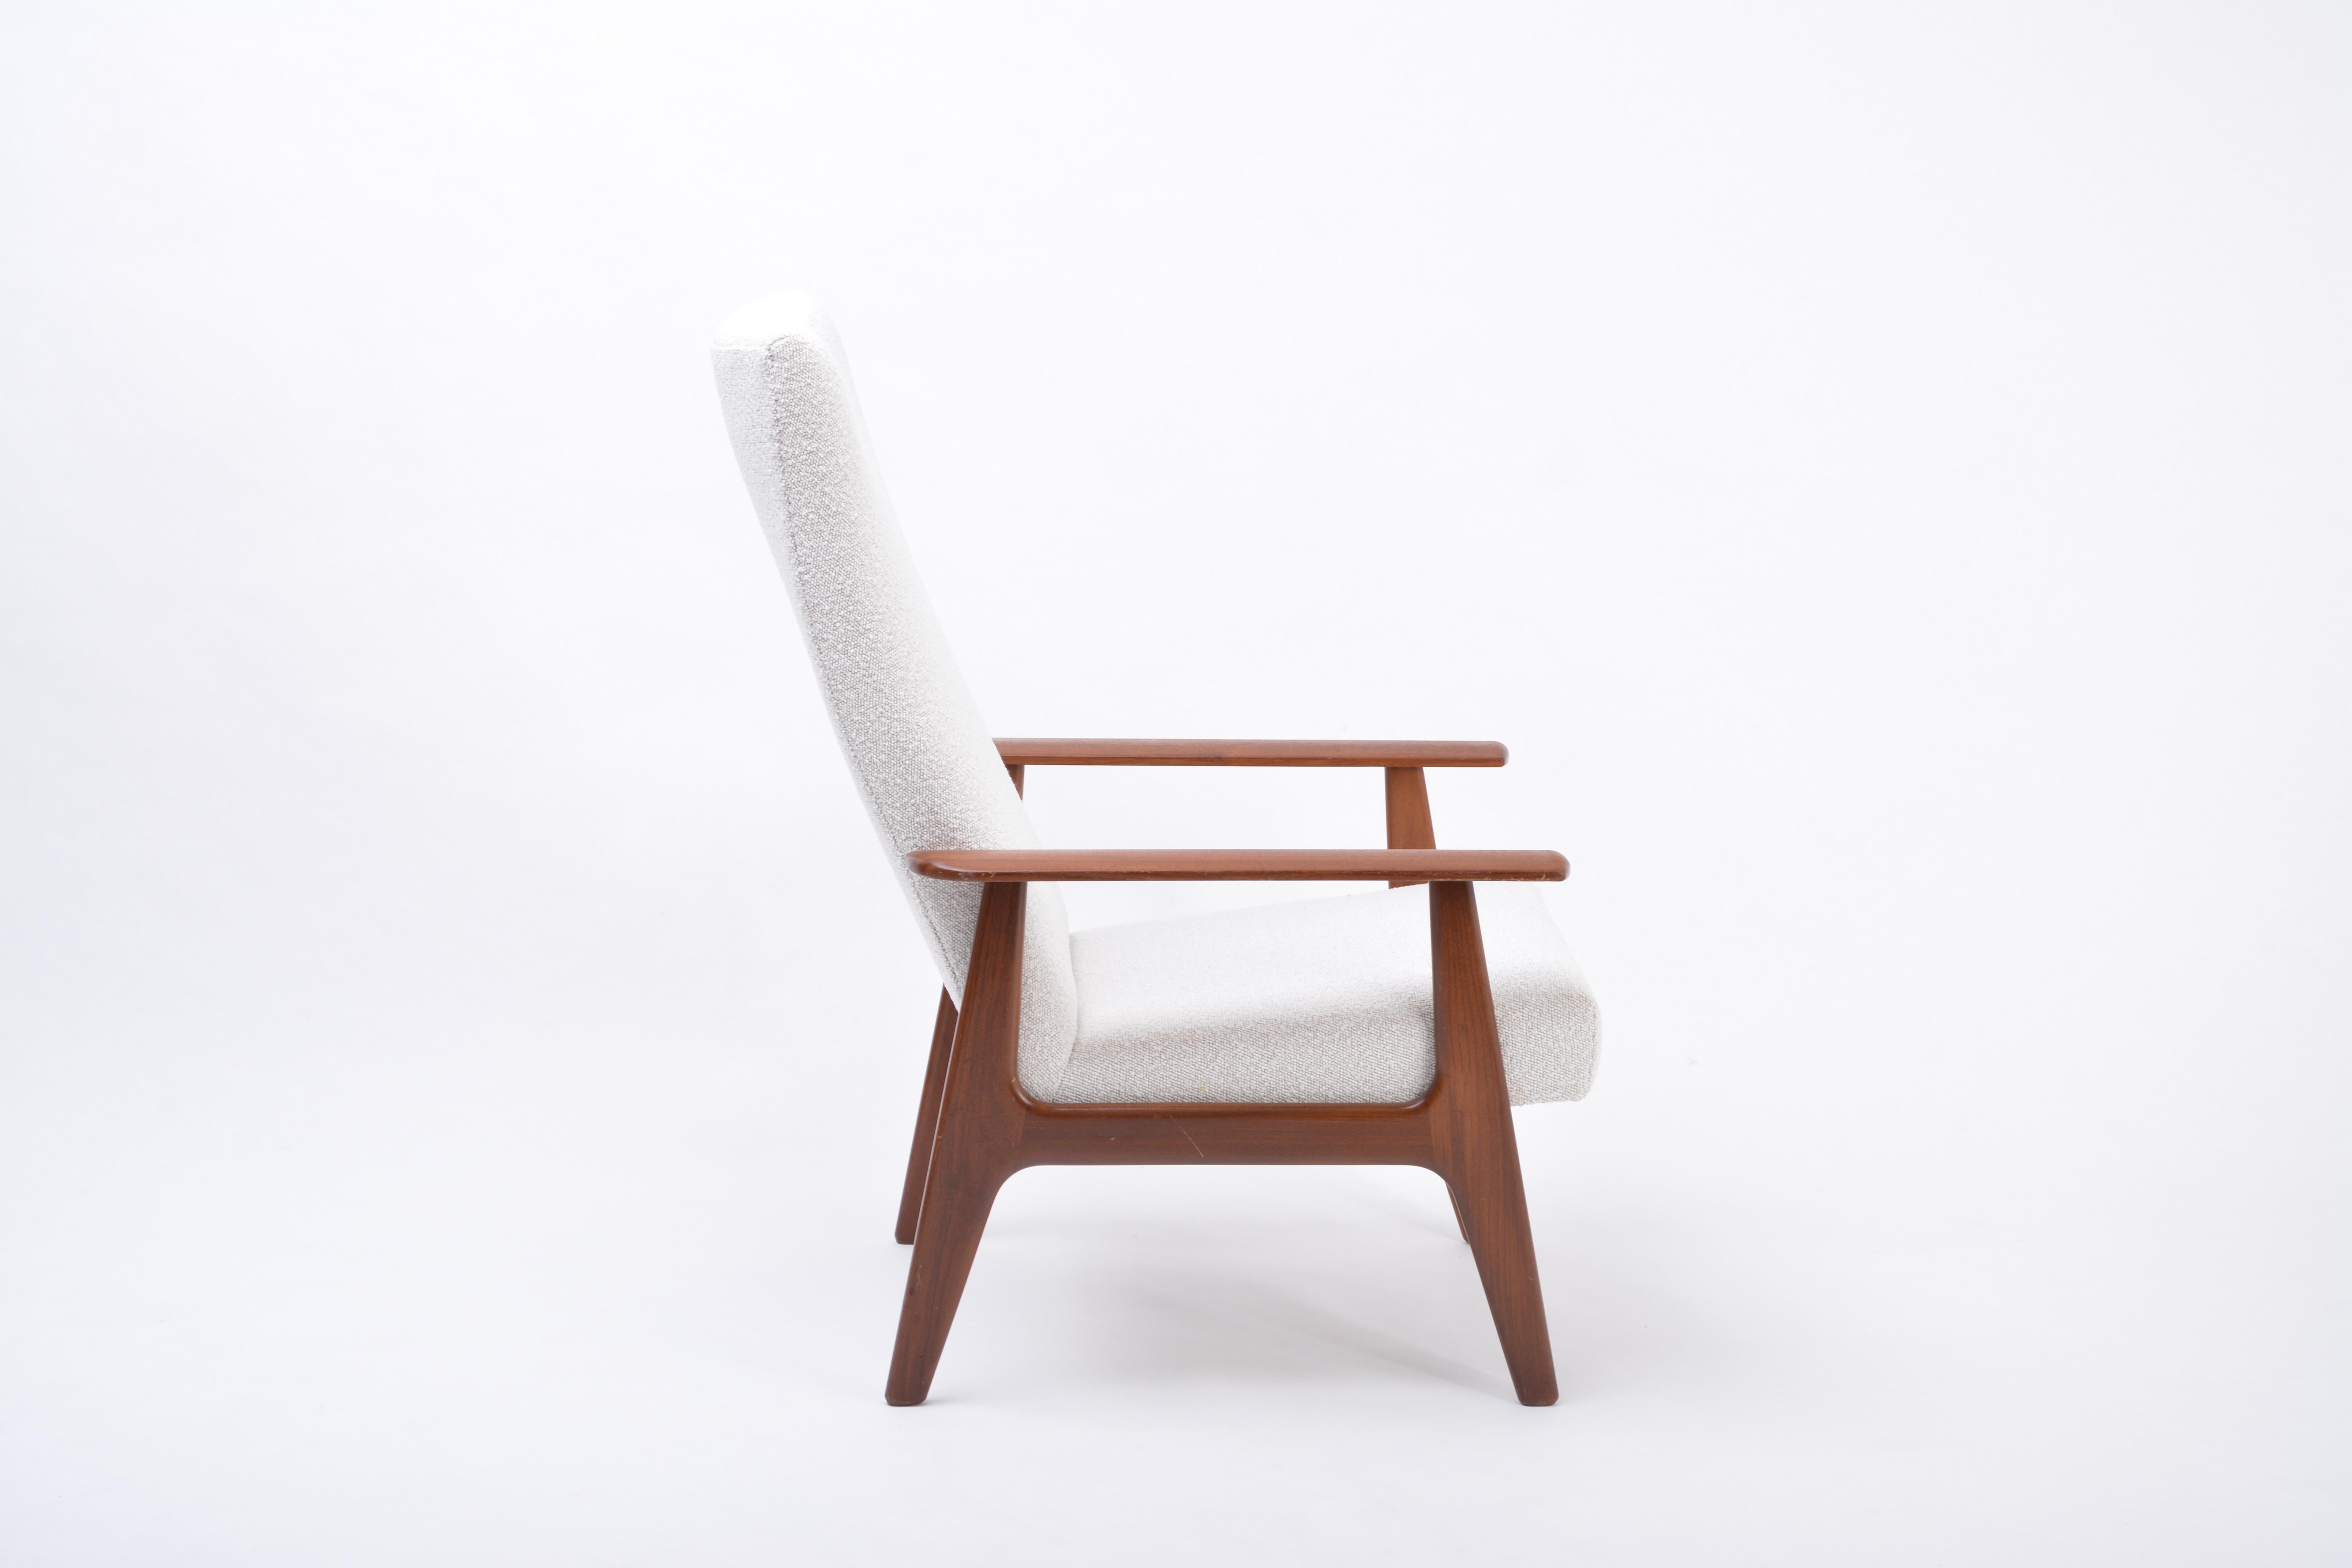 Dutch Mid-Century Modern Teak Lounge Chair by Topform reupholstered in Bouclé
This lounge chair was produced by Topform in the Netherlands in the 1970s. The structure is made of teak wood. The chair has been reupholstered completely using a white